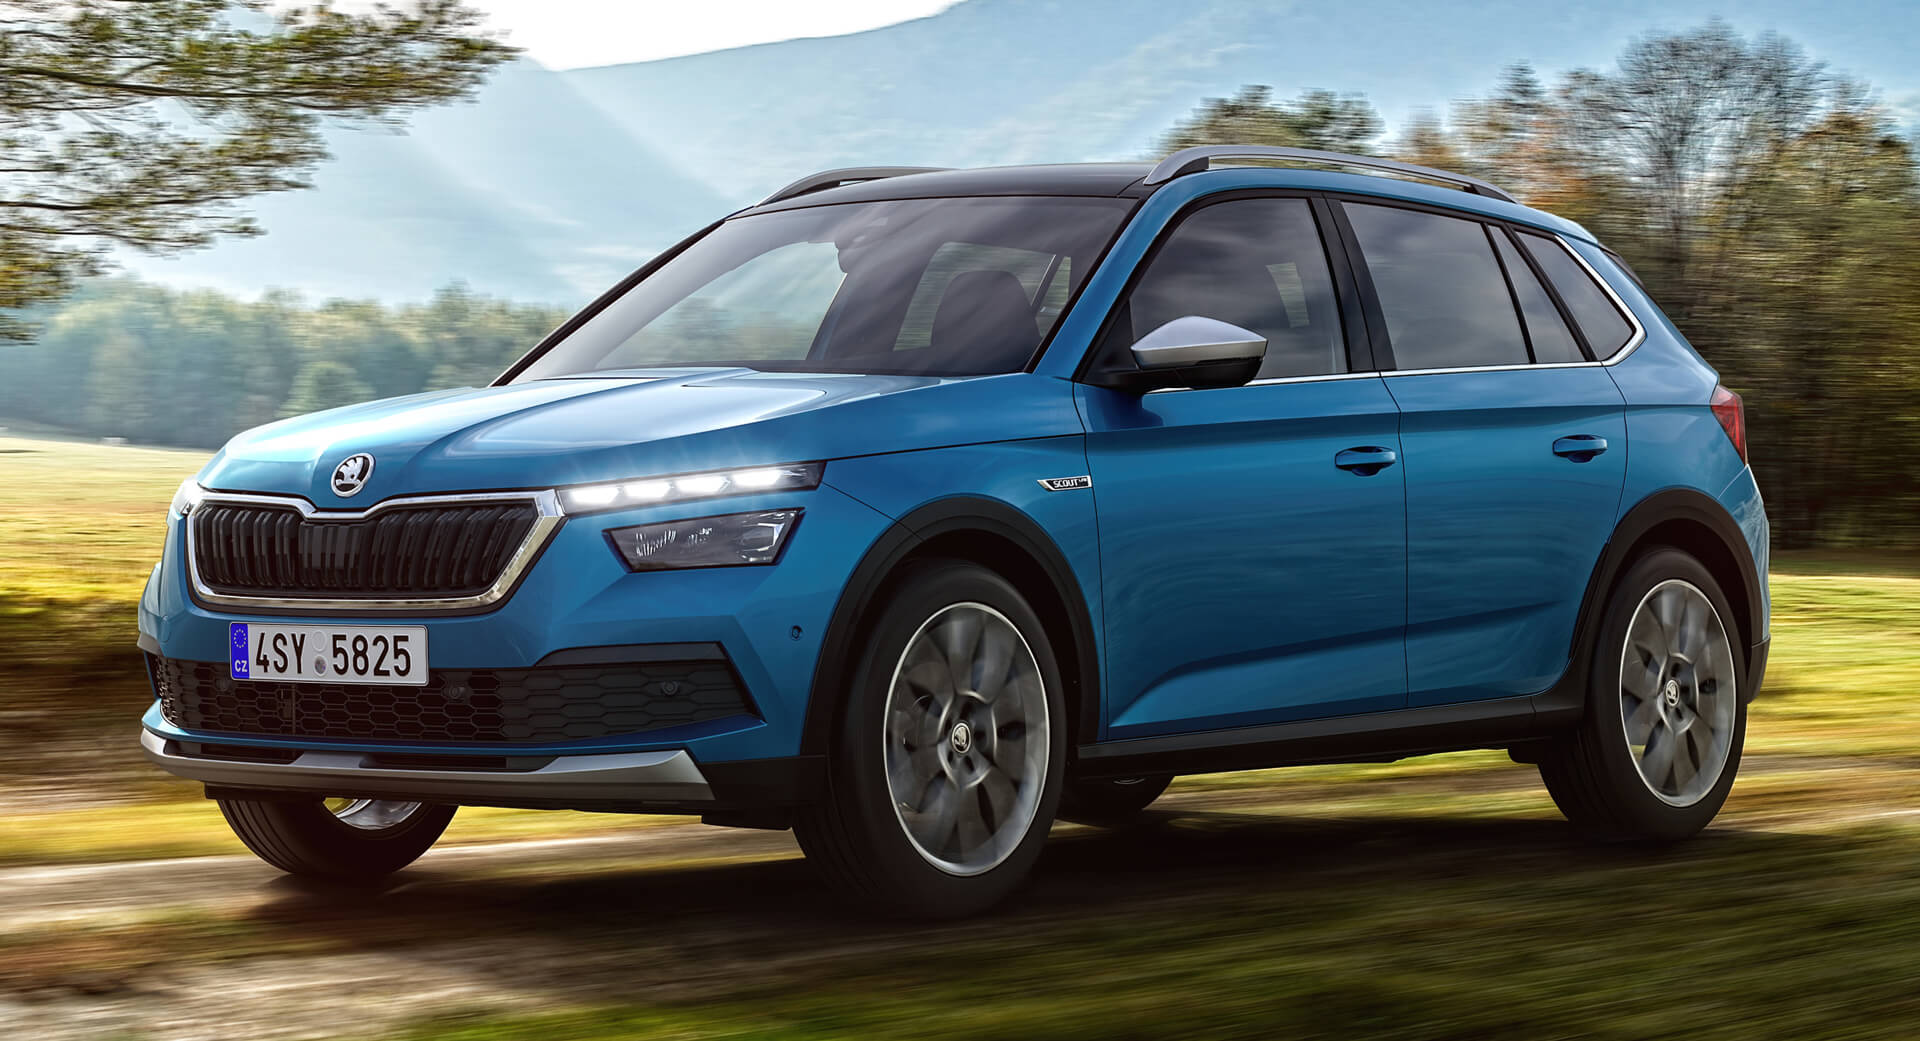 2020 Skoda Kamiq Gets The Scoutline Treatment, Will Launch This